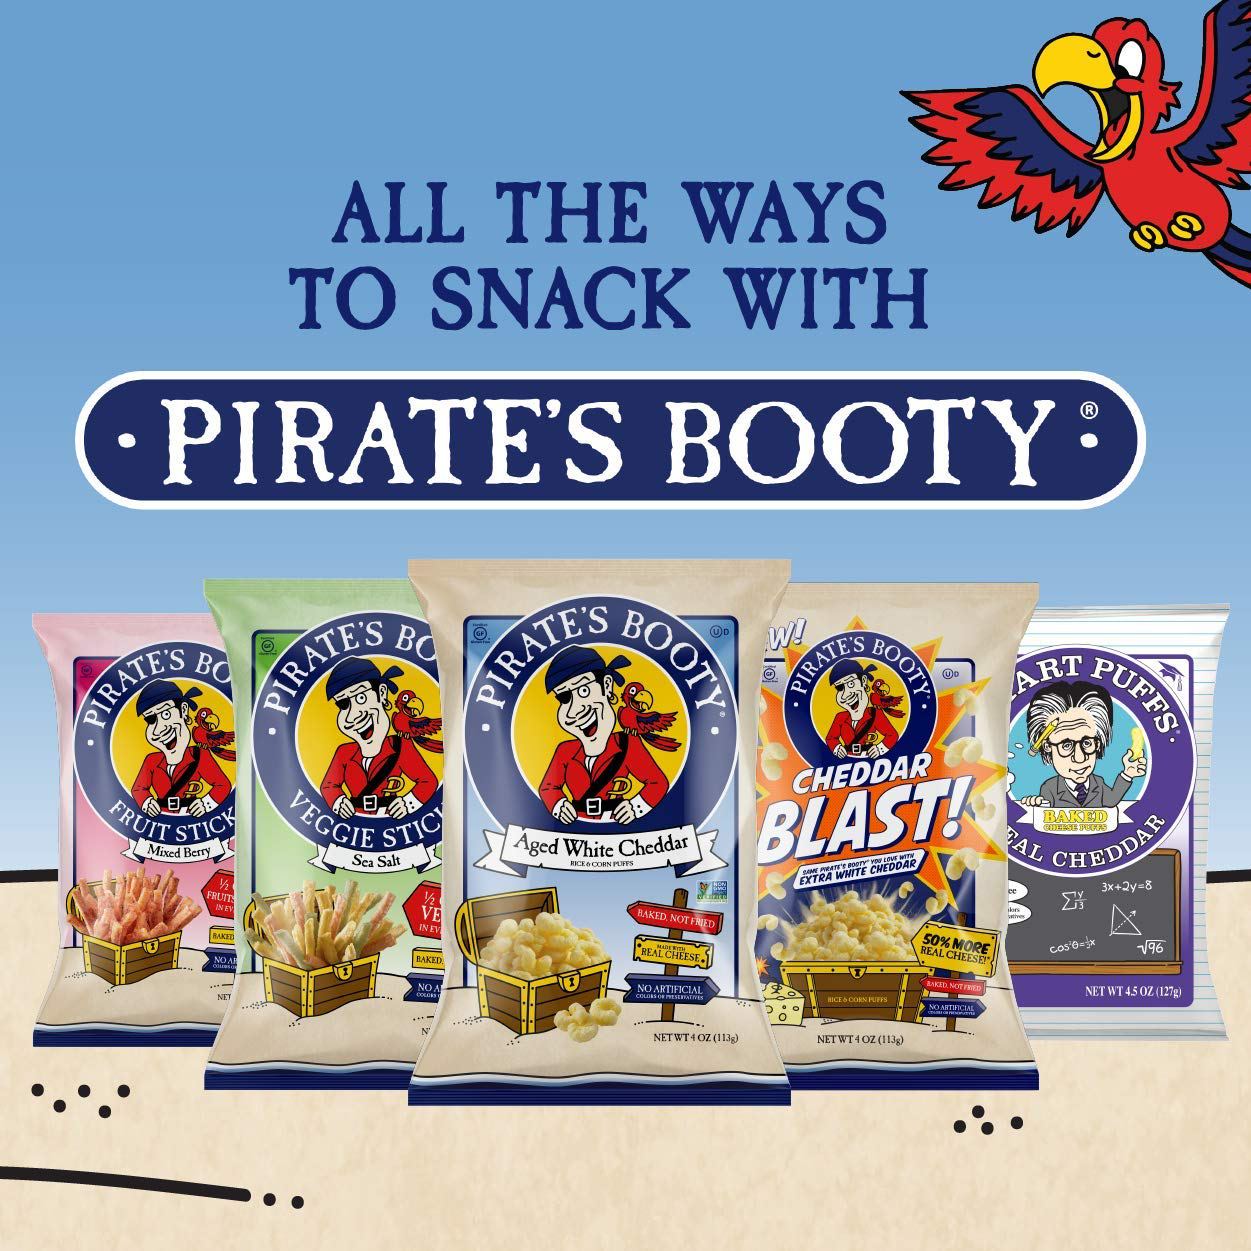 Pirate's Booty Aged White Cheddar Cheese Puffs, 24ct, 0.5oz Snack Size Bags, Gluten Free, Healthy Kids Snacks, 100 Calorie Snack Packs